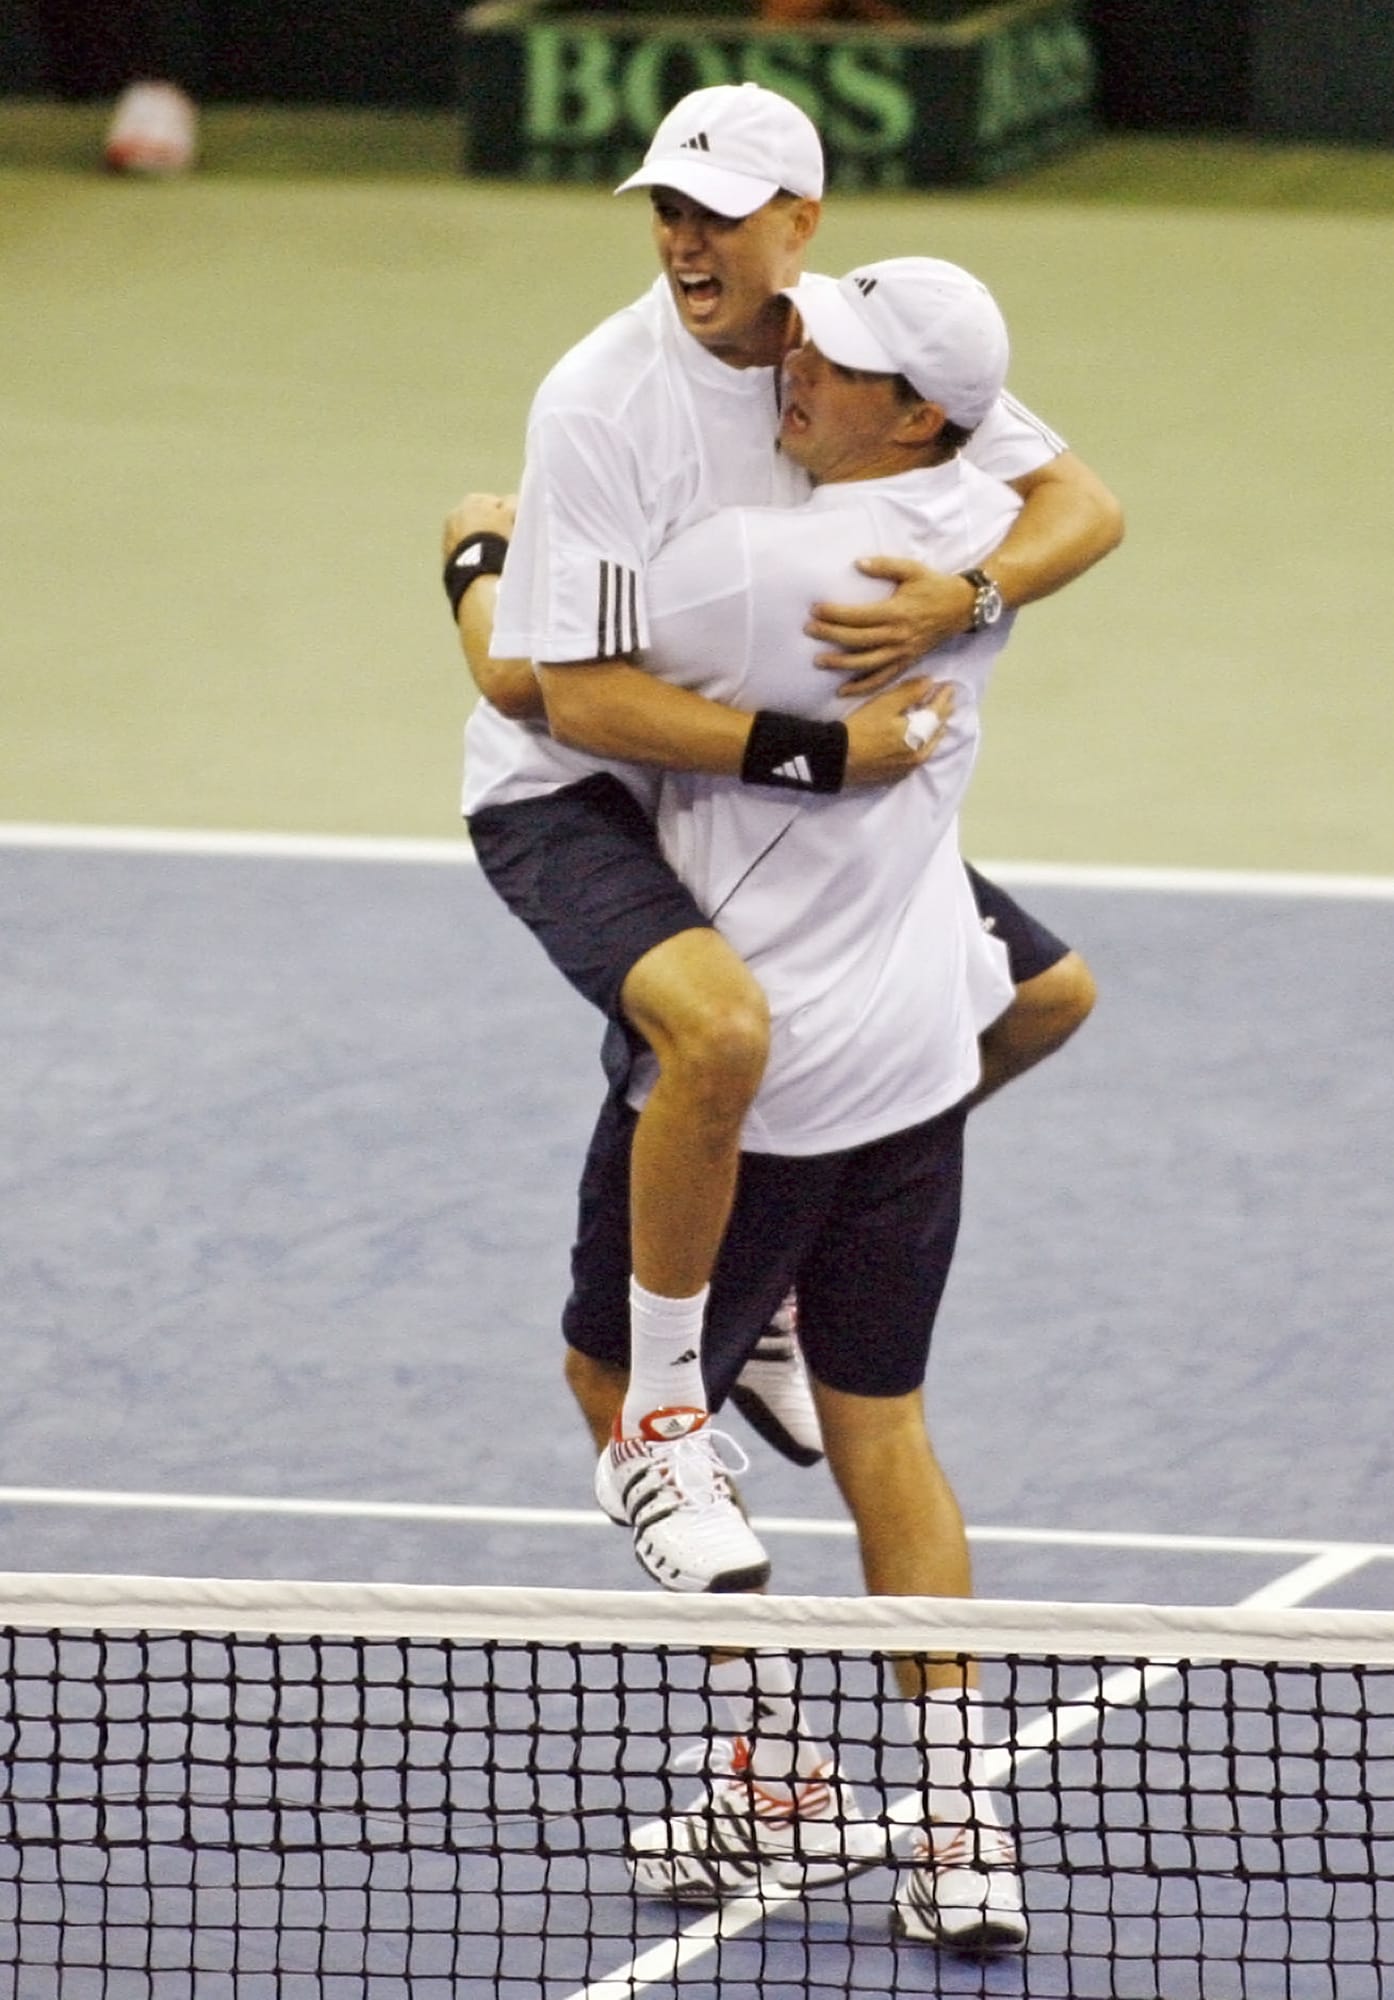 United States' Mike Bryan, left, jumps into his brother Bob Bryan's arms after defeating Russia's Igor Andreev and Nikolay Davydenko 7-6 (4), 6-4, 6-2 in the title-clinching Davis Cup Final doubles match on Saturday, Dec. 1, 2007 in Portland. The twins announced on Wednesday, Nov. 13, 2019 that they will retire after playing in the 2020 U.S. Open.